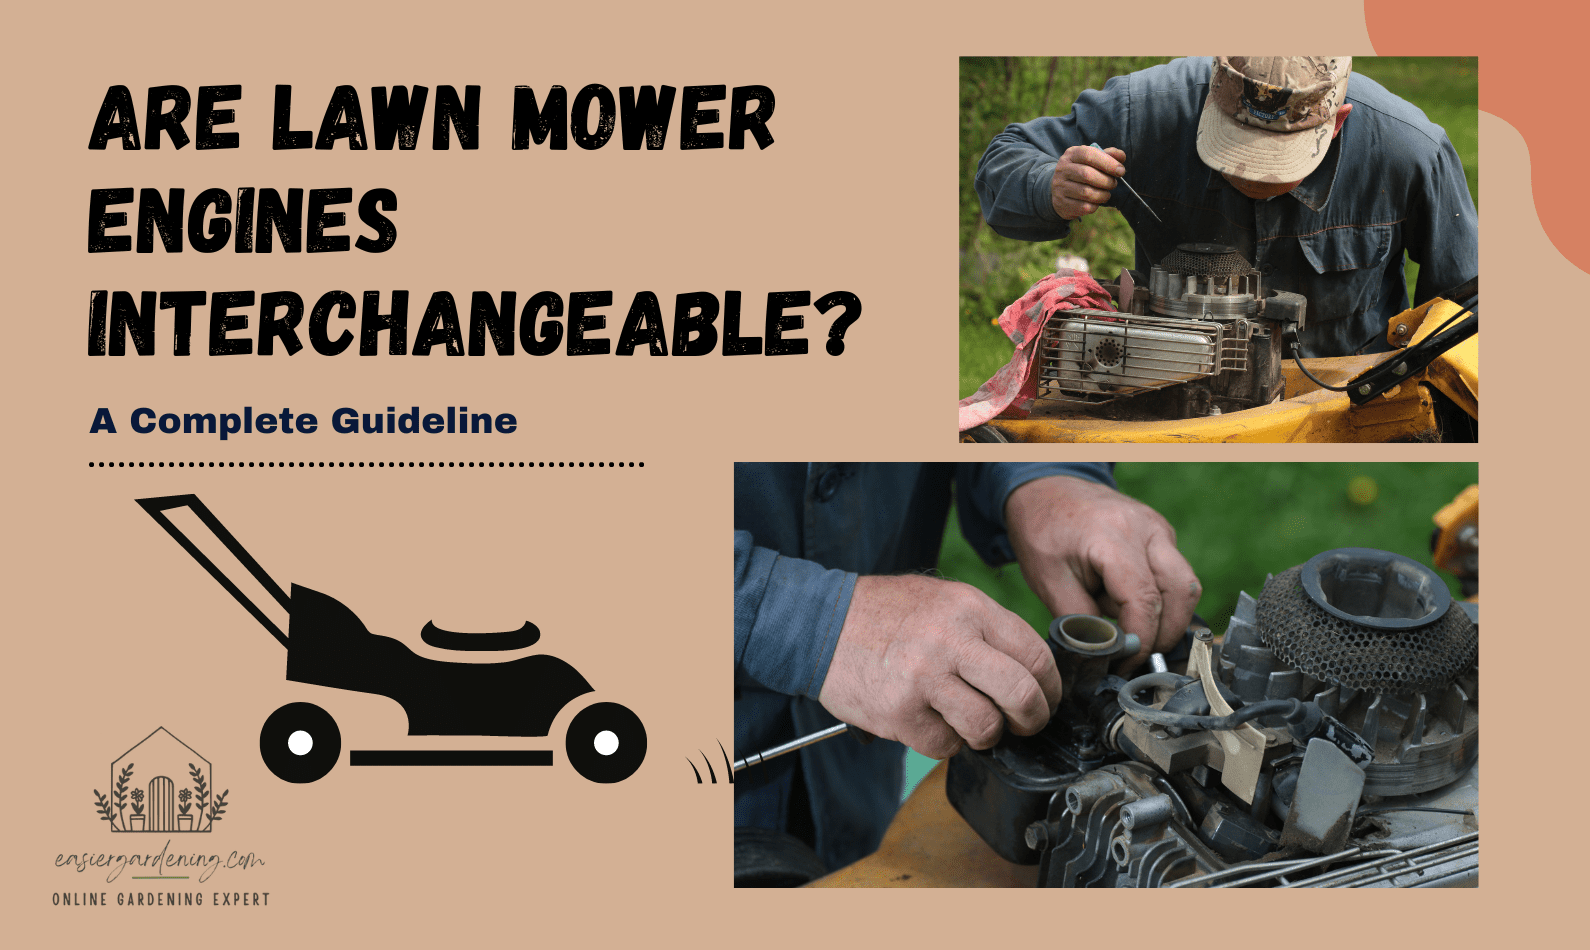 Are Lawn Mower Engines Interchangeable?